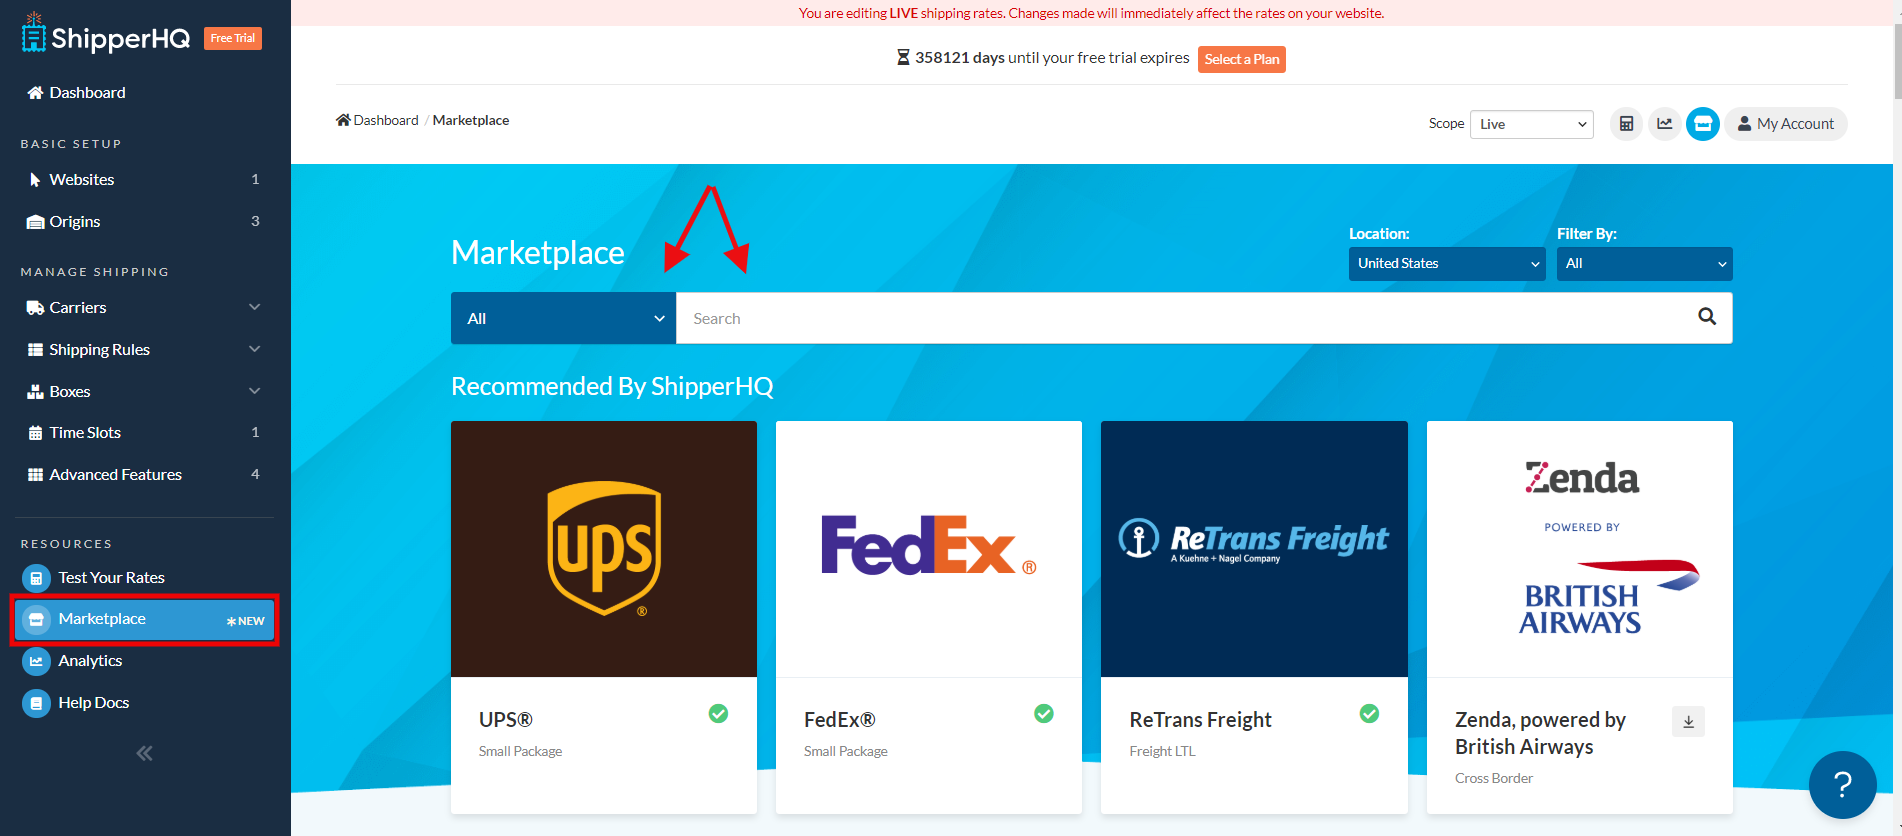 Search ShipperHQ's carrier marketplace to install Old Dominion Freight Lines